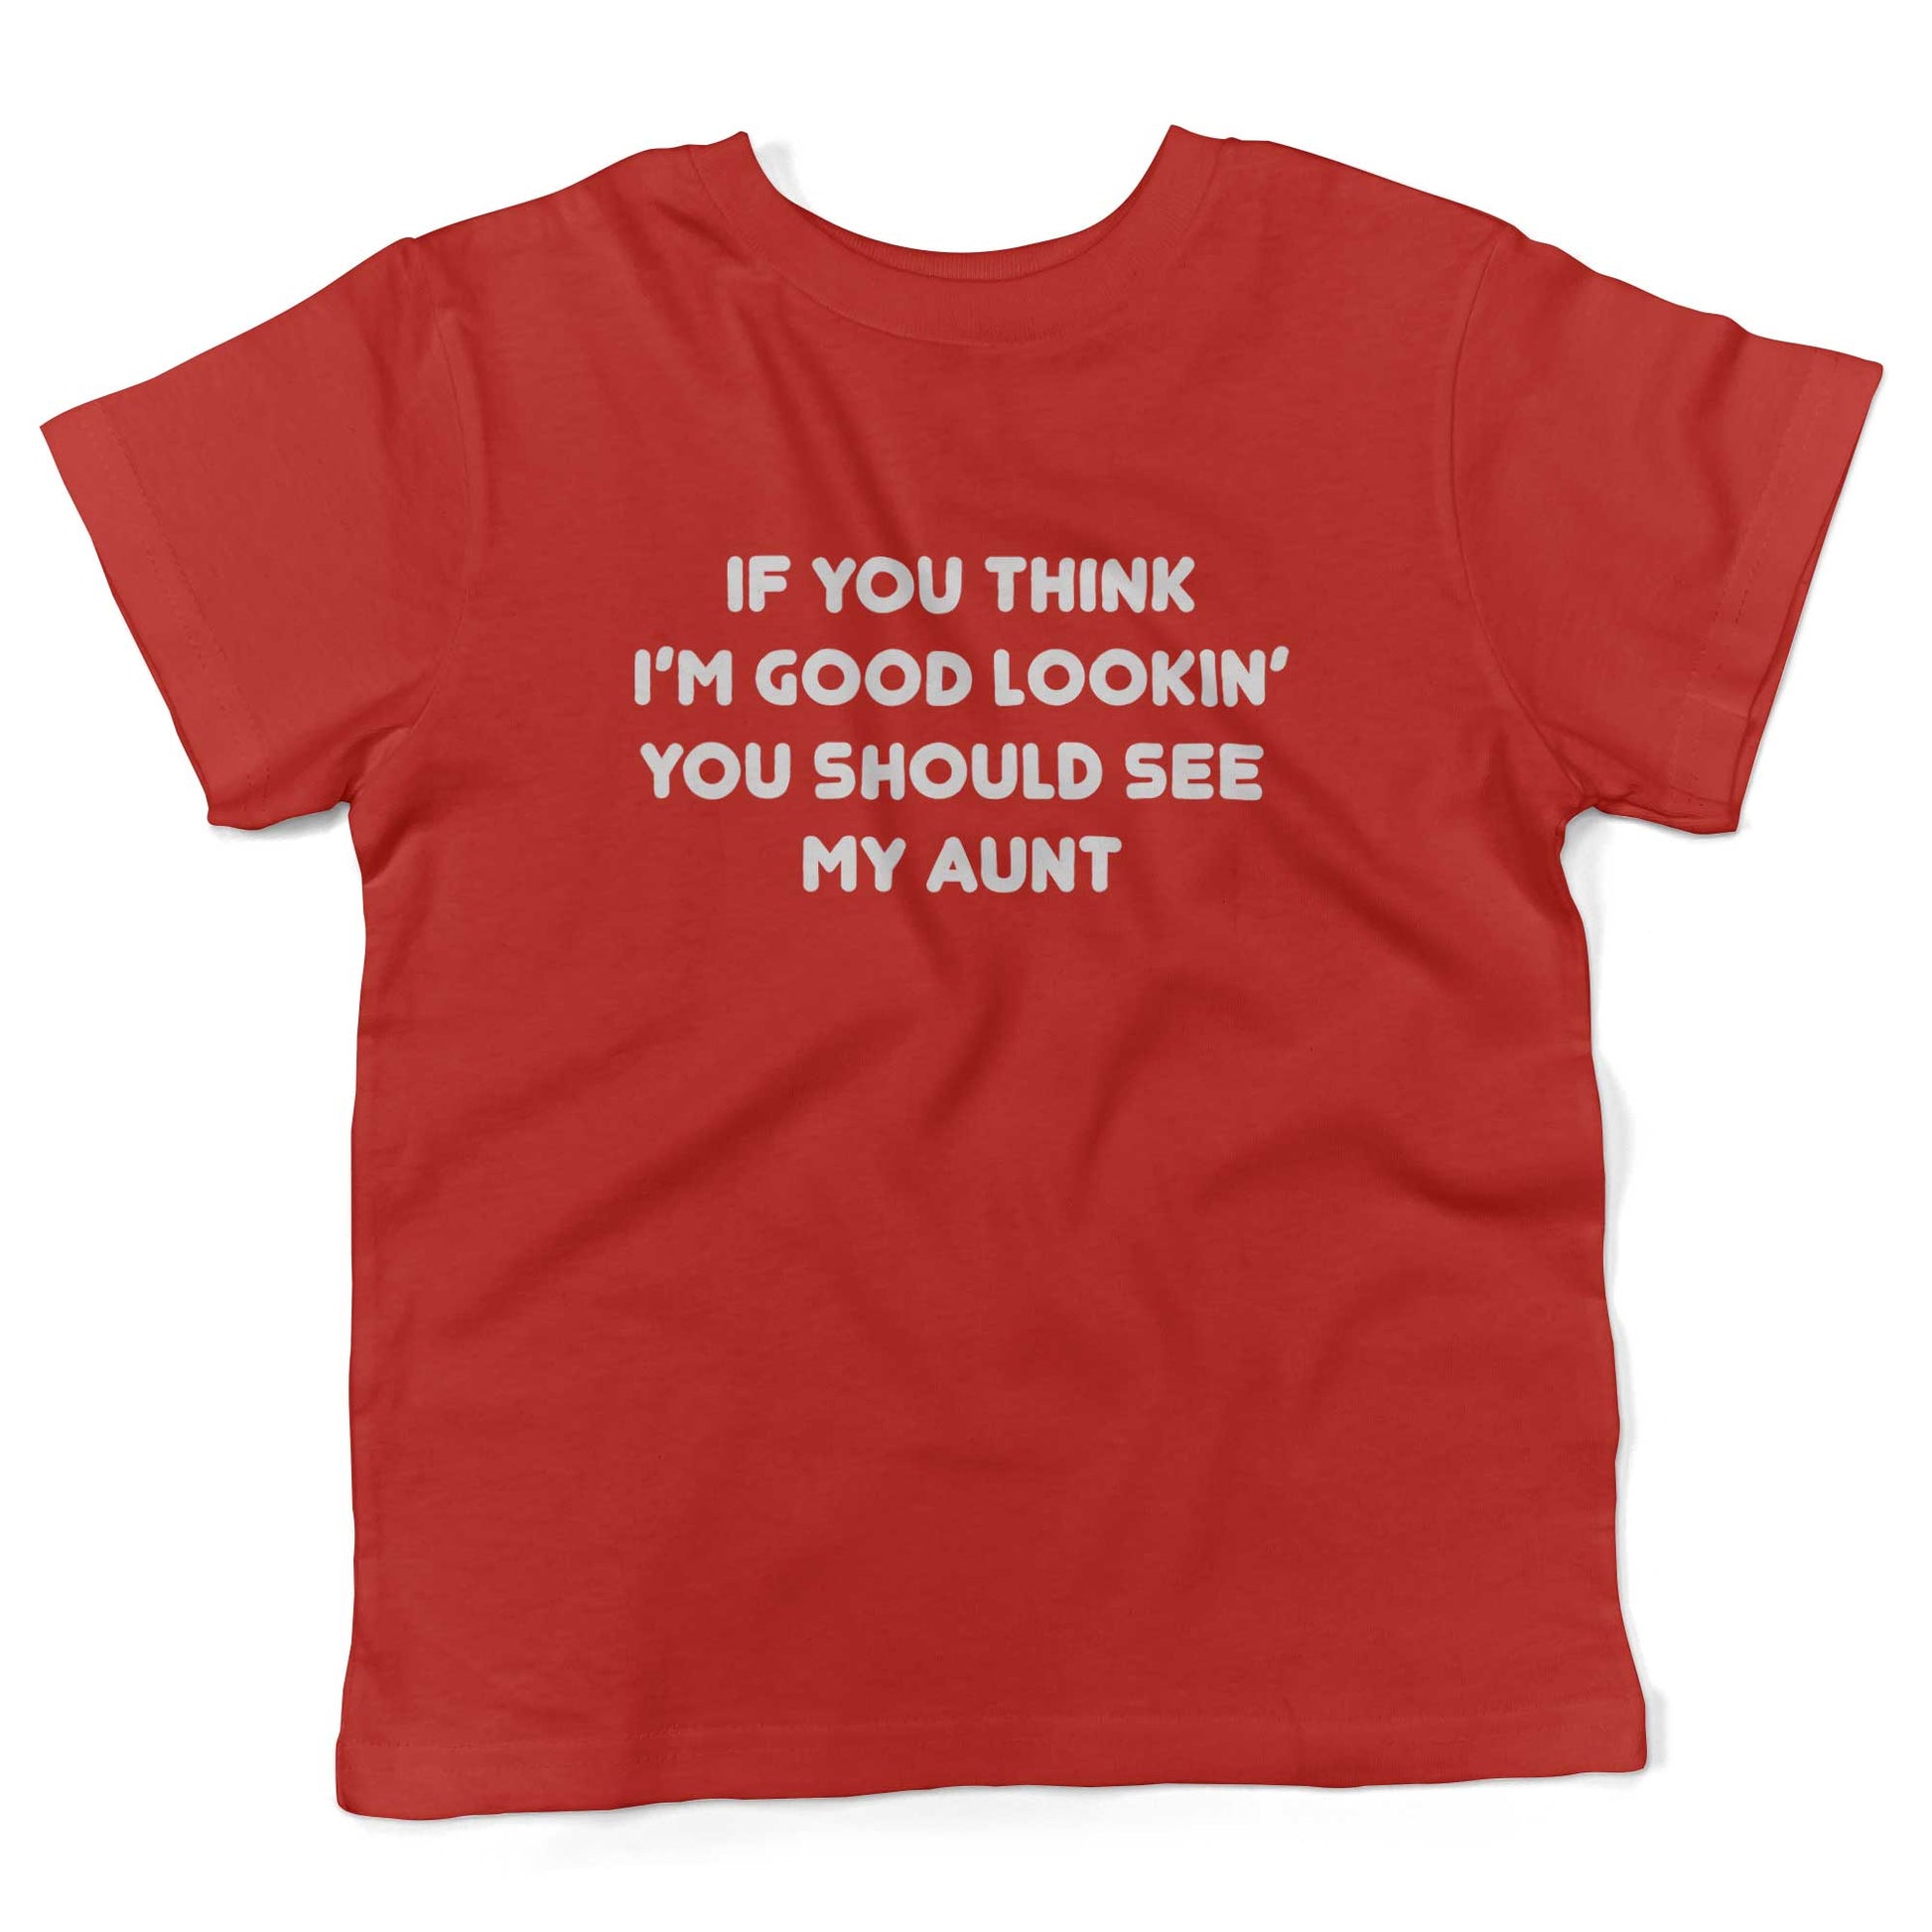 If You Think I'm Good Lookin' You Should See My Aunt Toddler Shirt-Red-2T